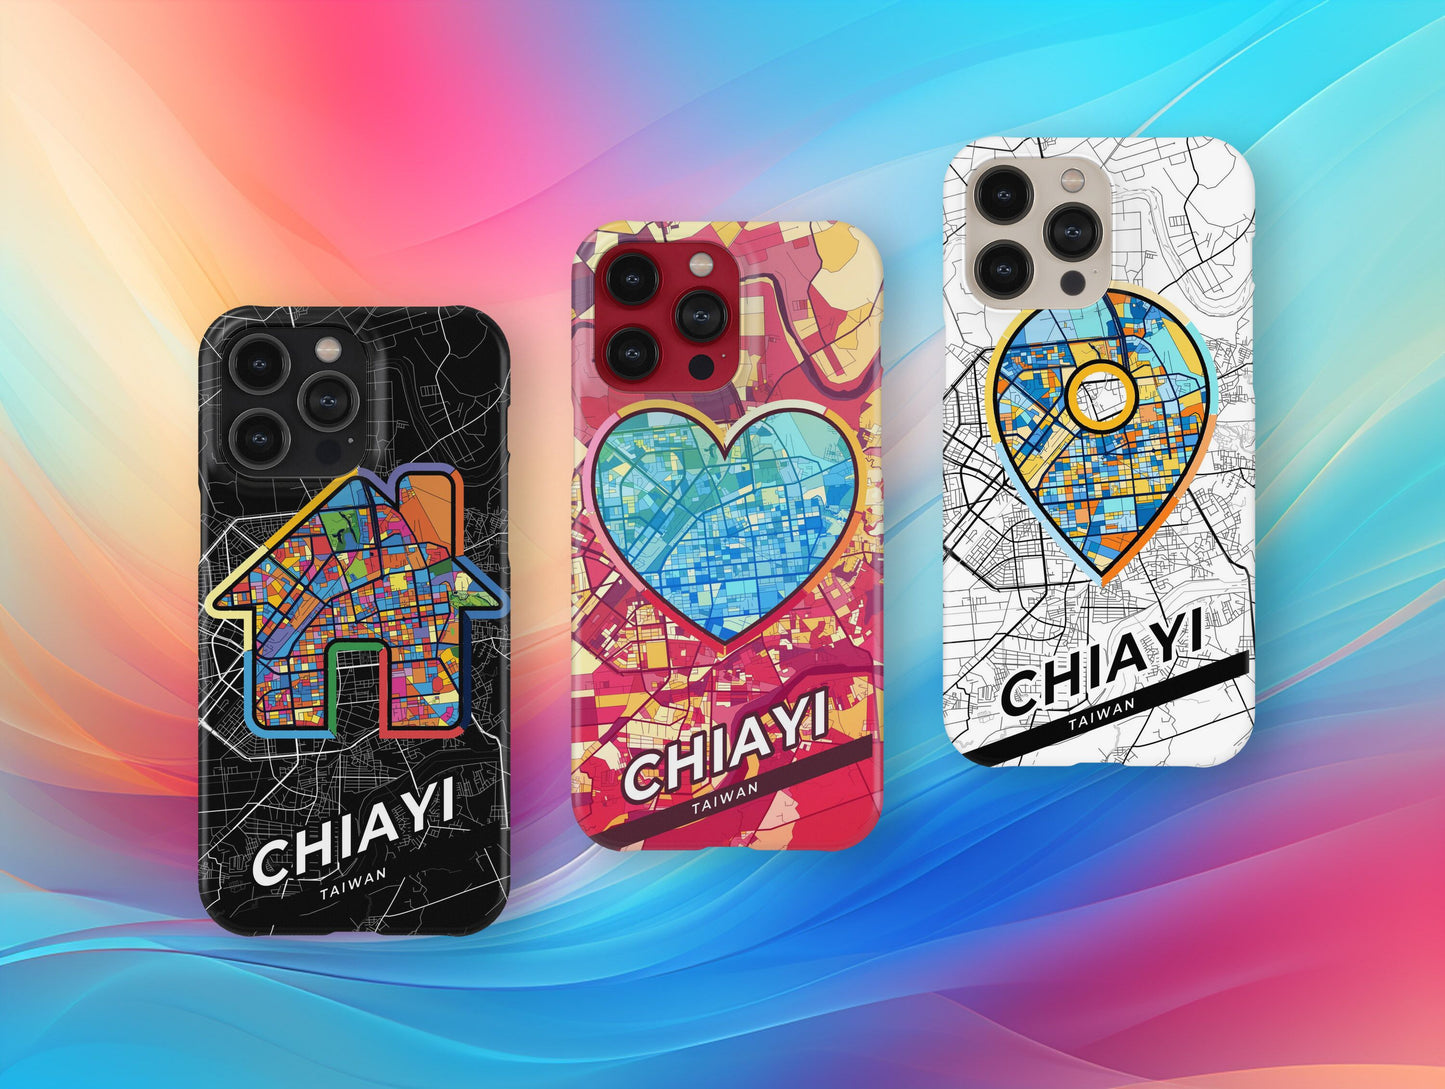 Chiayi Taiwan slim phone case with colorful icon. Birthday, wedding or housewarming gift. Couple match cases.